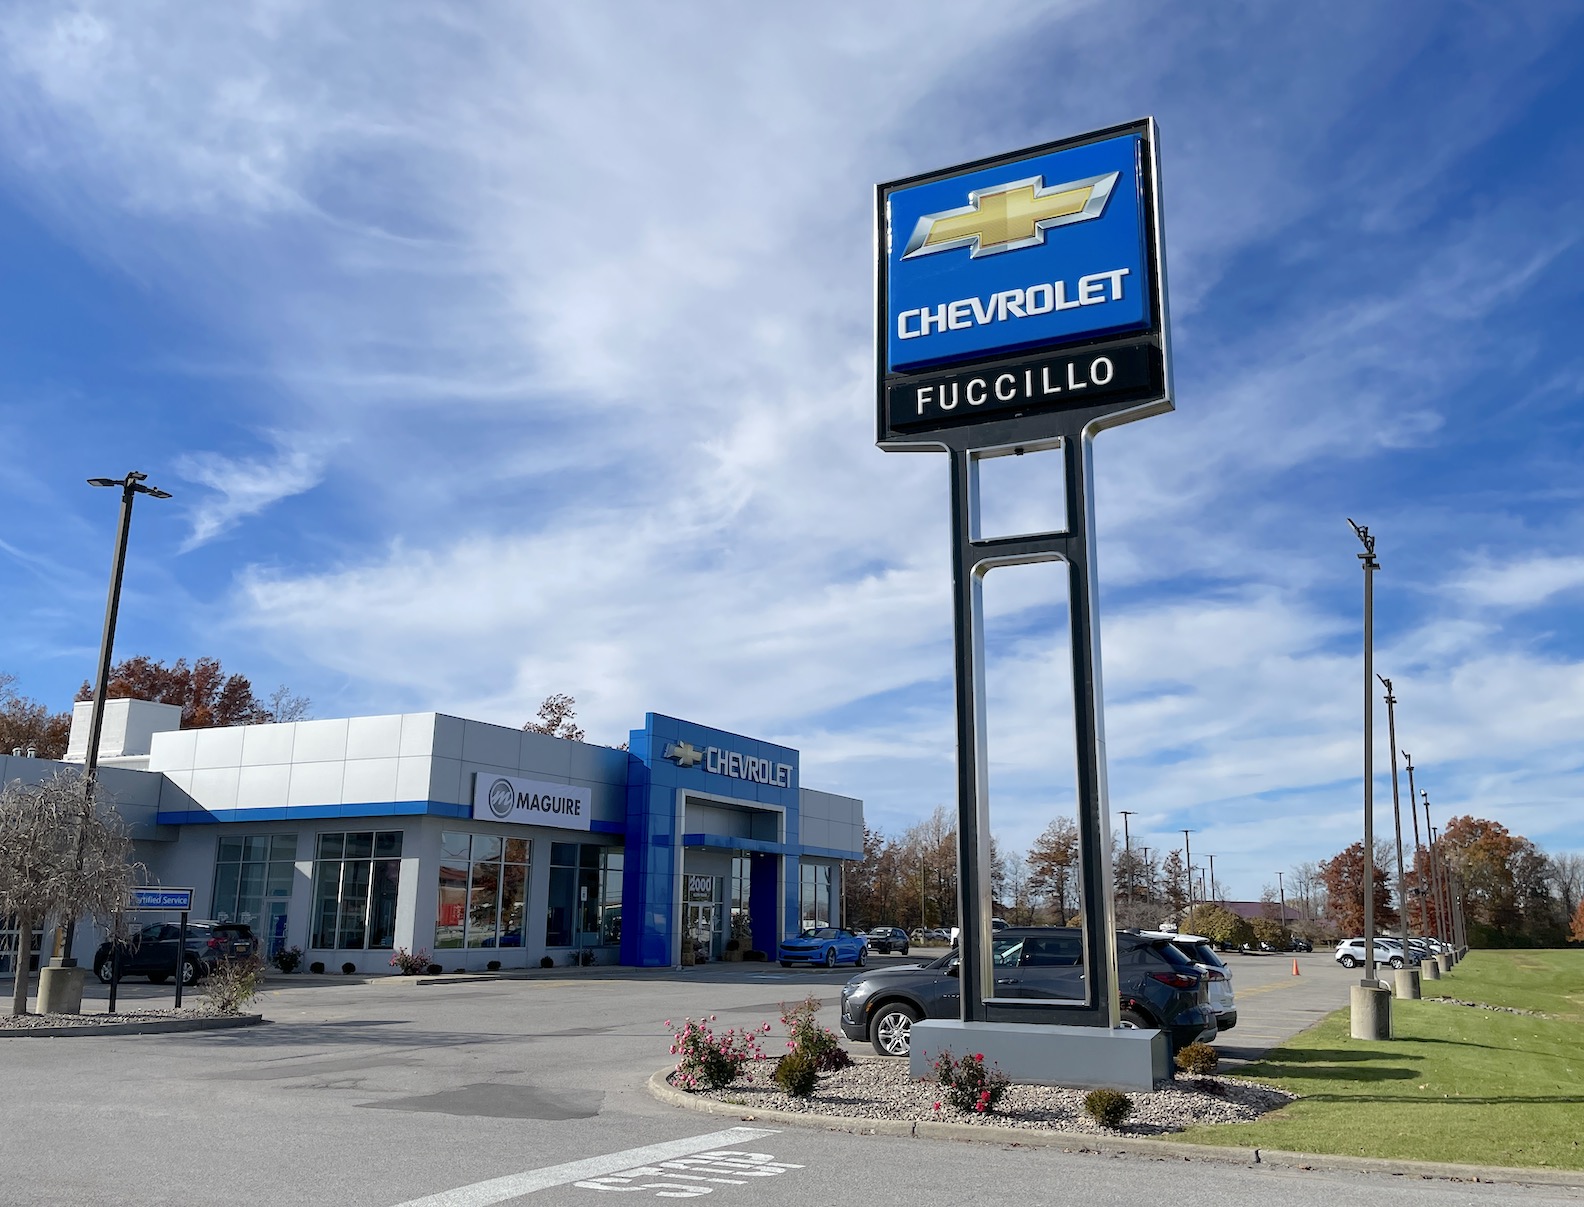 The Maguire Family of Dealerships on Thursday announced its acquisition of Fuccillo Chevrolet of Grand Island, Fuccillo Toyota of Grand Island, and Fuccillo Hyundai of Grand Island from the Fuccillo Auto Group.